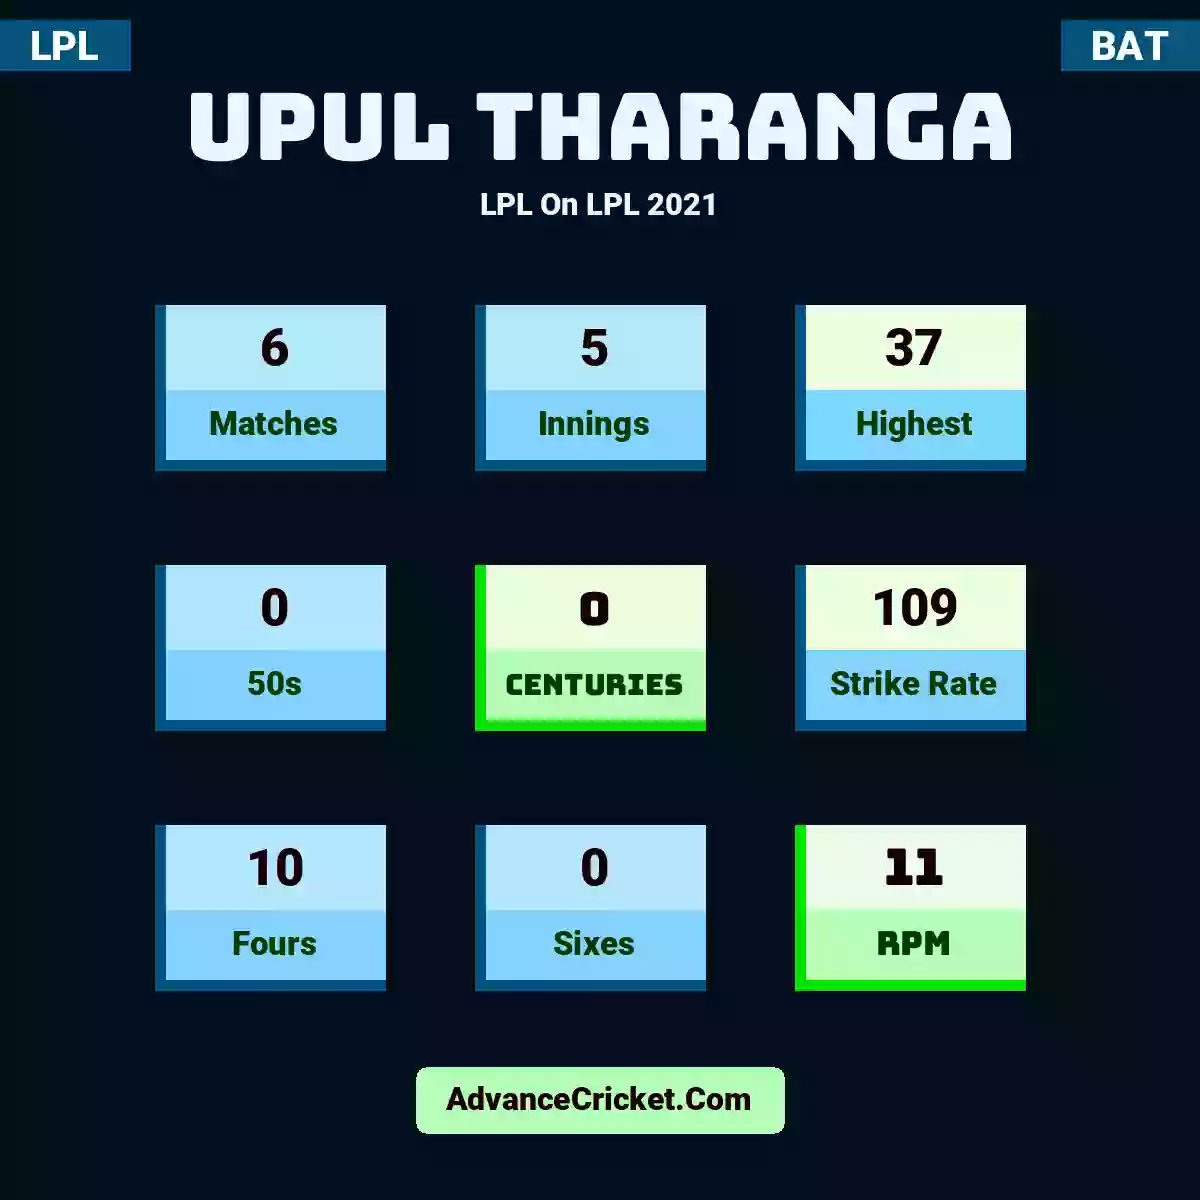 Upul Tharanga LPL  On LPL 2021, Upul Tharanga played 6 matches, scored 37 runs as highest, 0 half-centuries, and 0 centuries, with a strike rate of 109. U.Tharanga hit 10 fours and 0 sixes, with an RPM of 11.